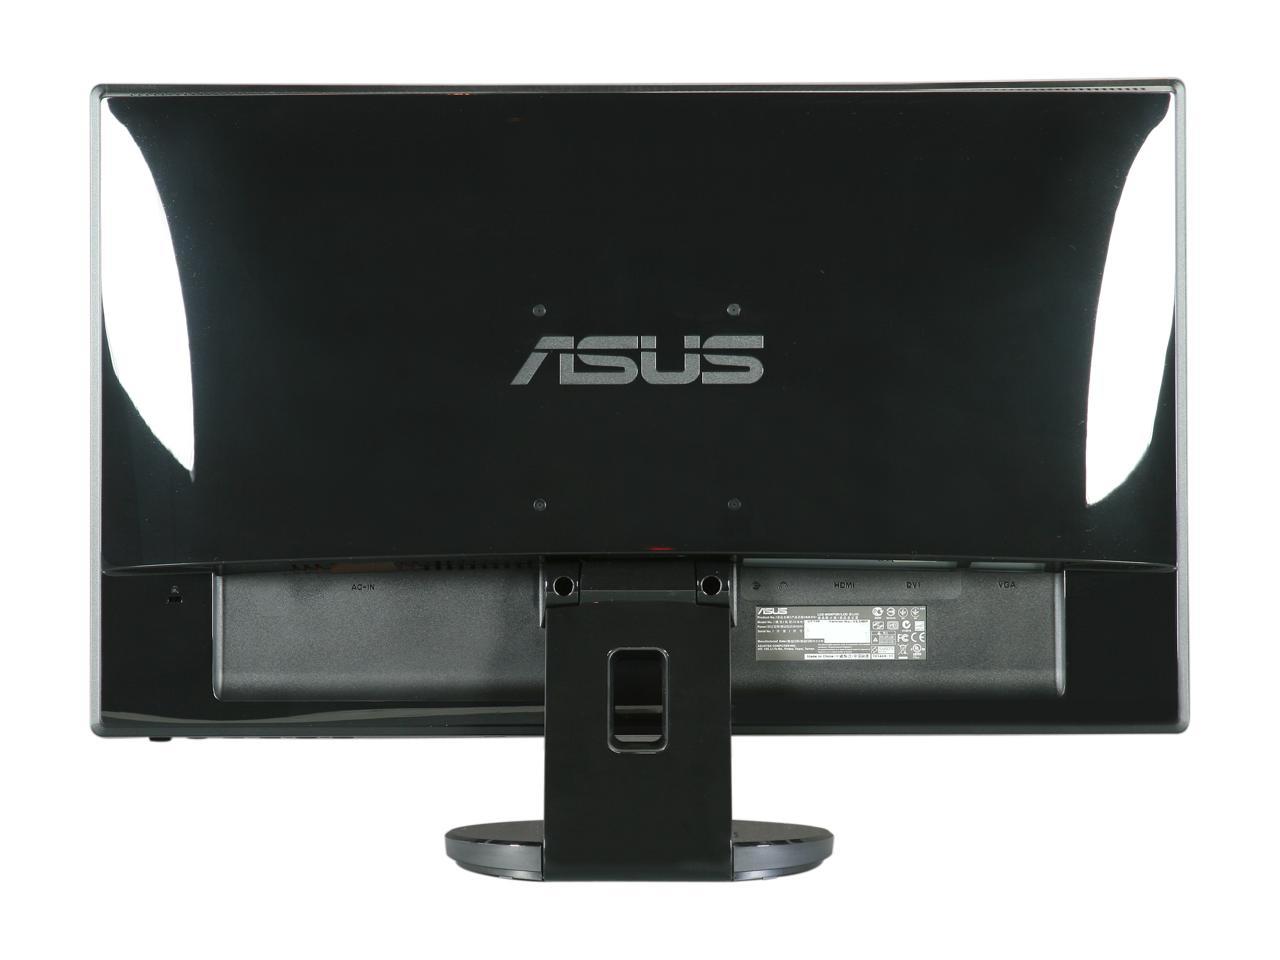 ASUS VE248H 24" Full HD 1920 x 1080 2ms (GTG) D-Sub, DVI, HDMI Built-in Speakers Asus Eye Care with Ultra Low-Blue Light & Flicker-Free LED Backlight Monitor